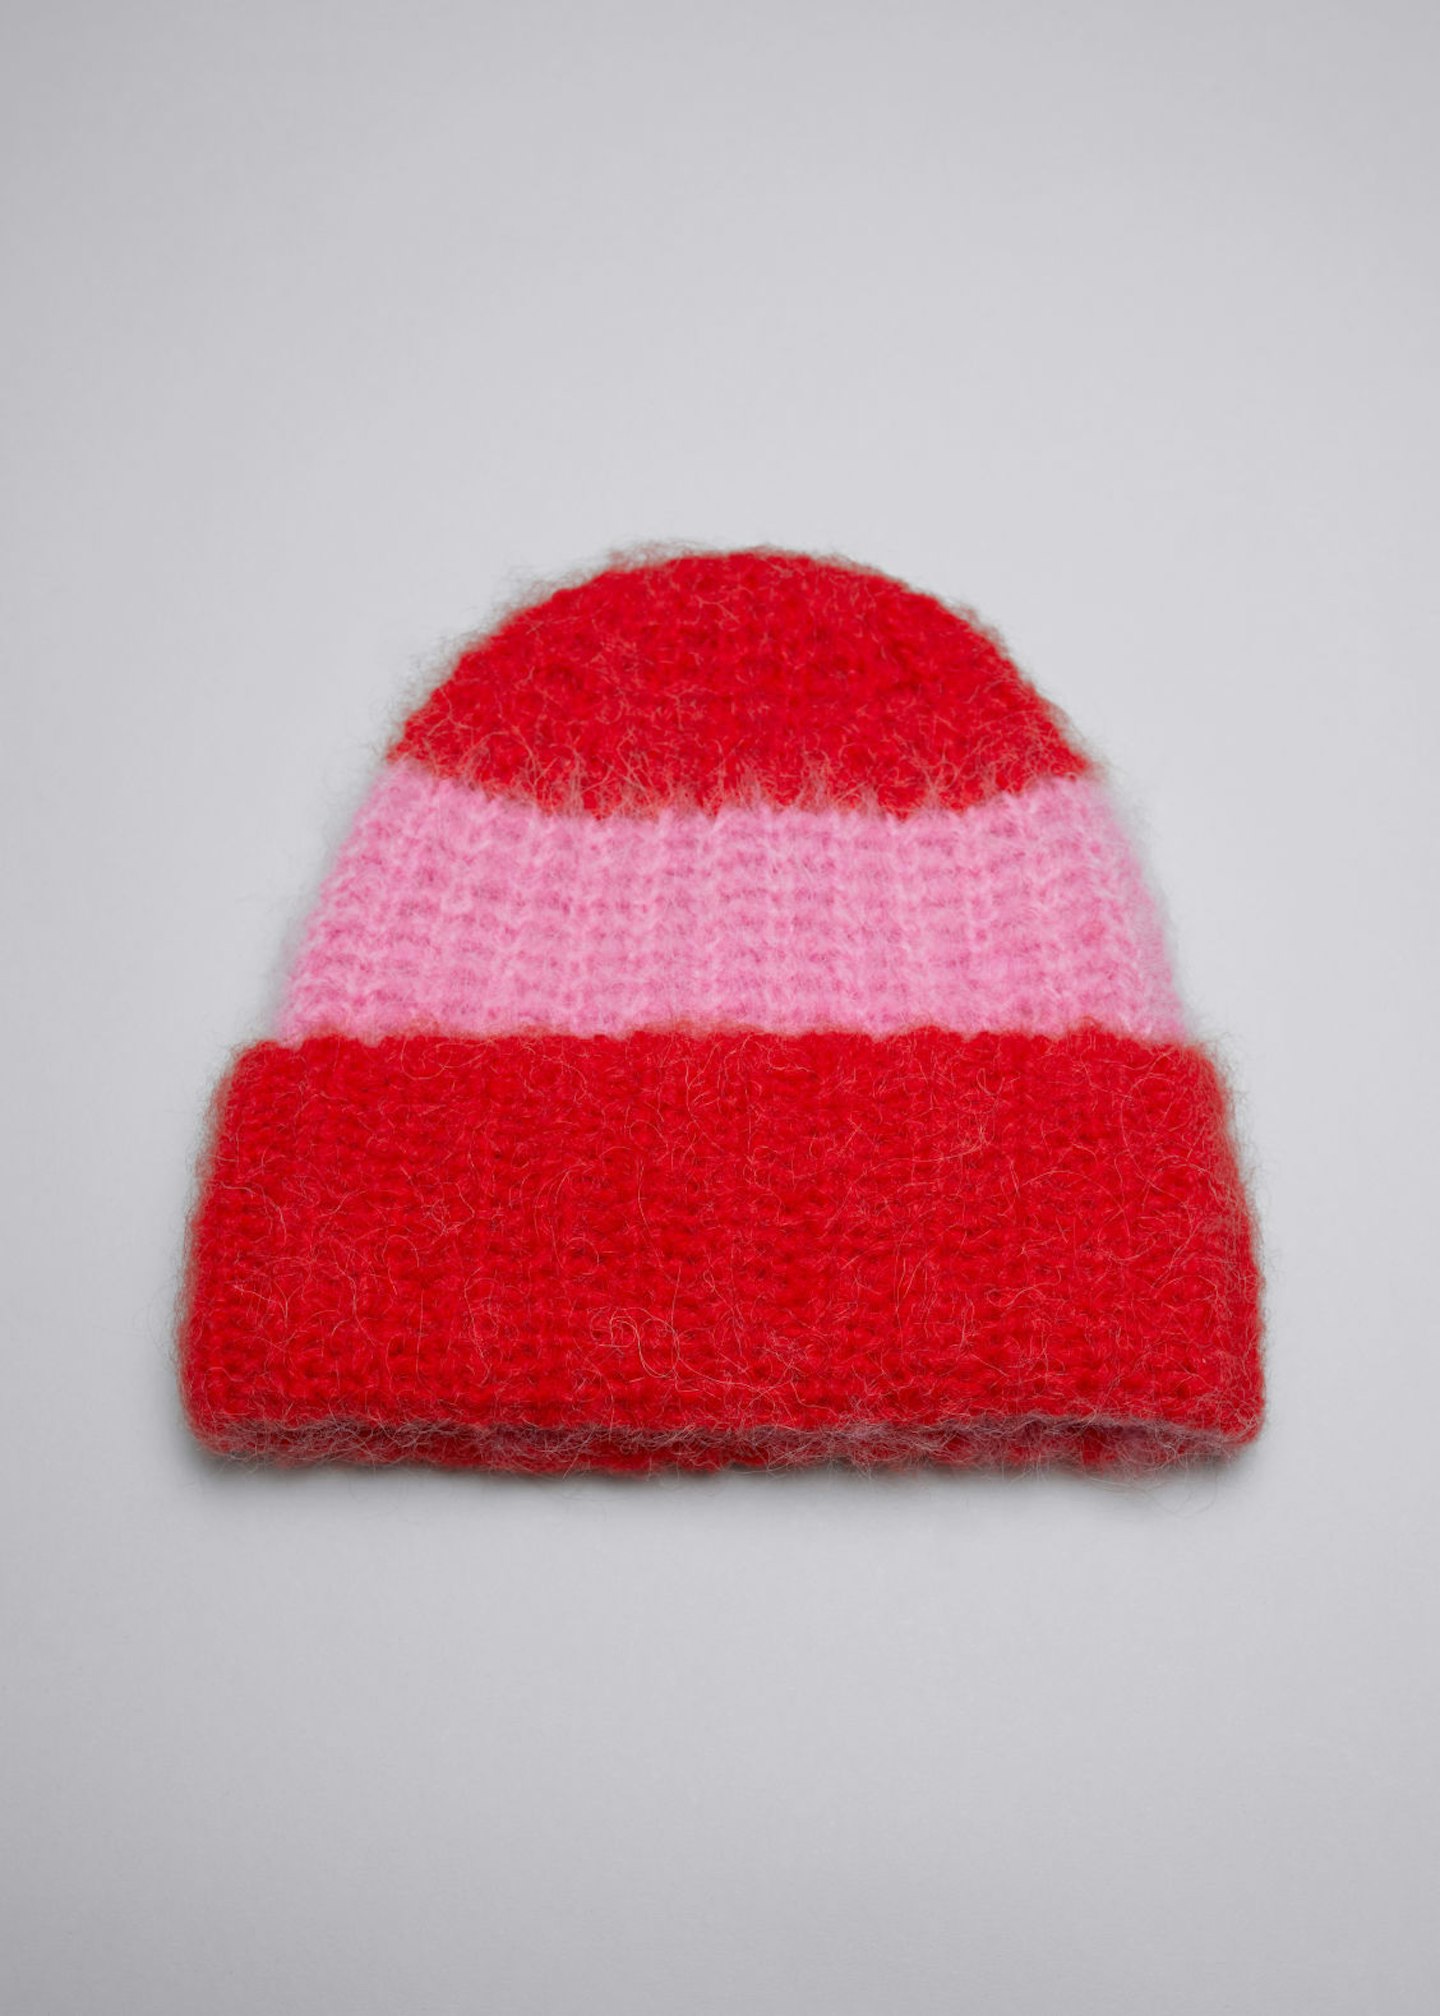 & Other Stories beanie 